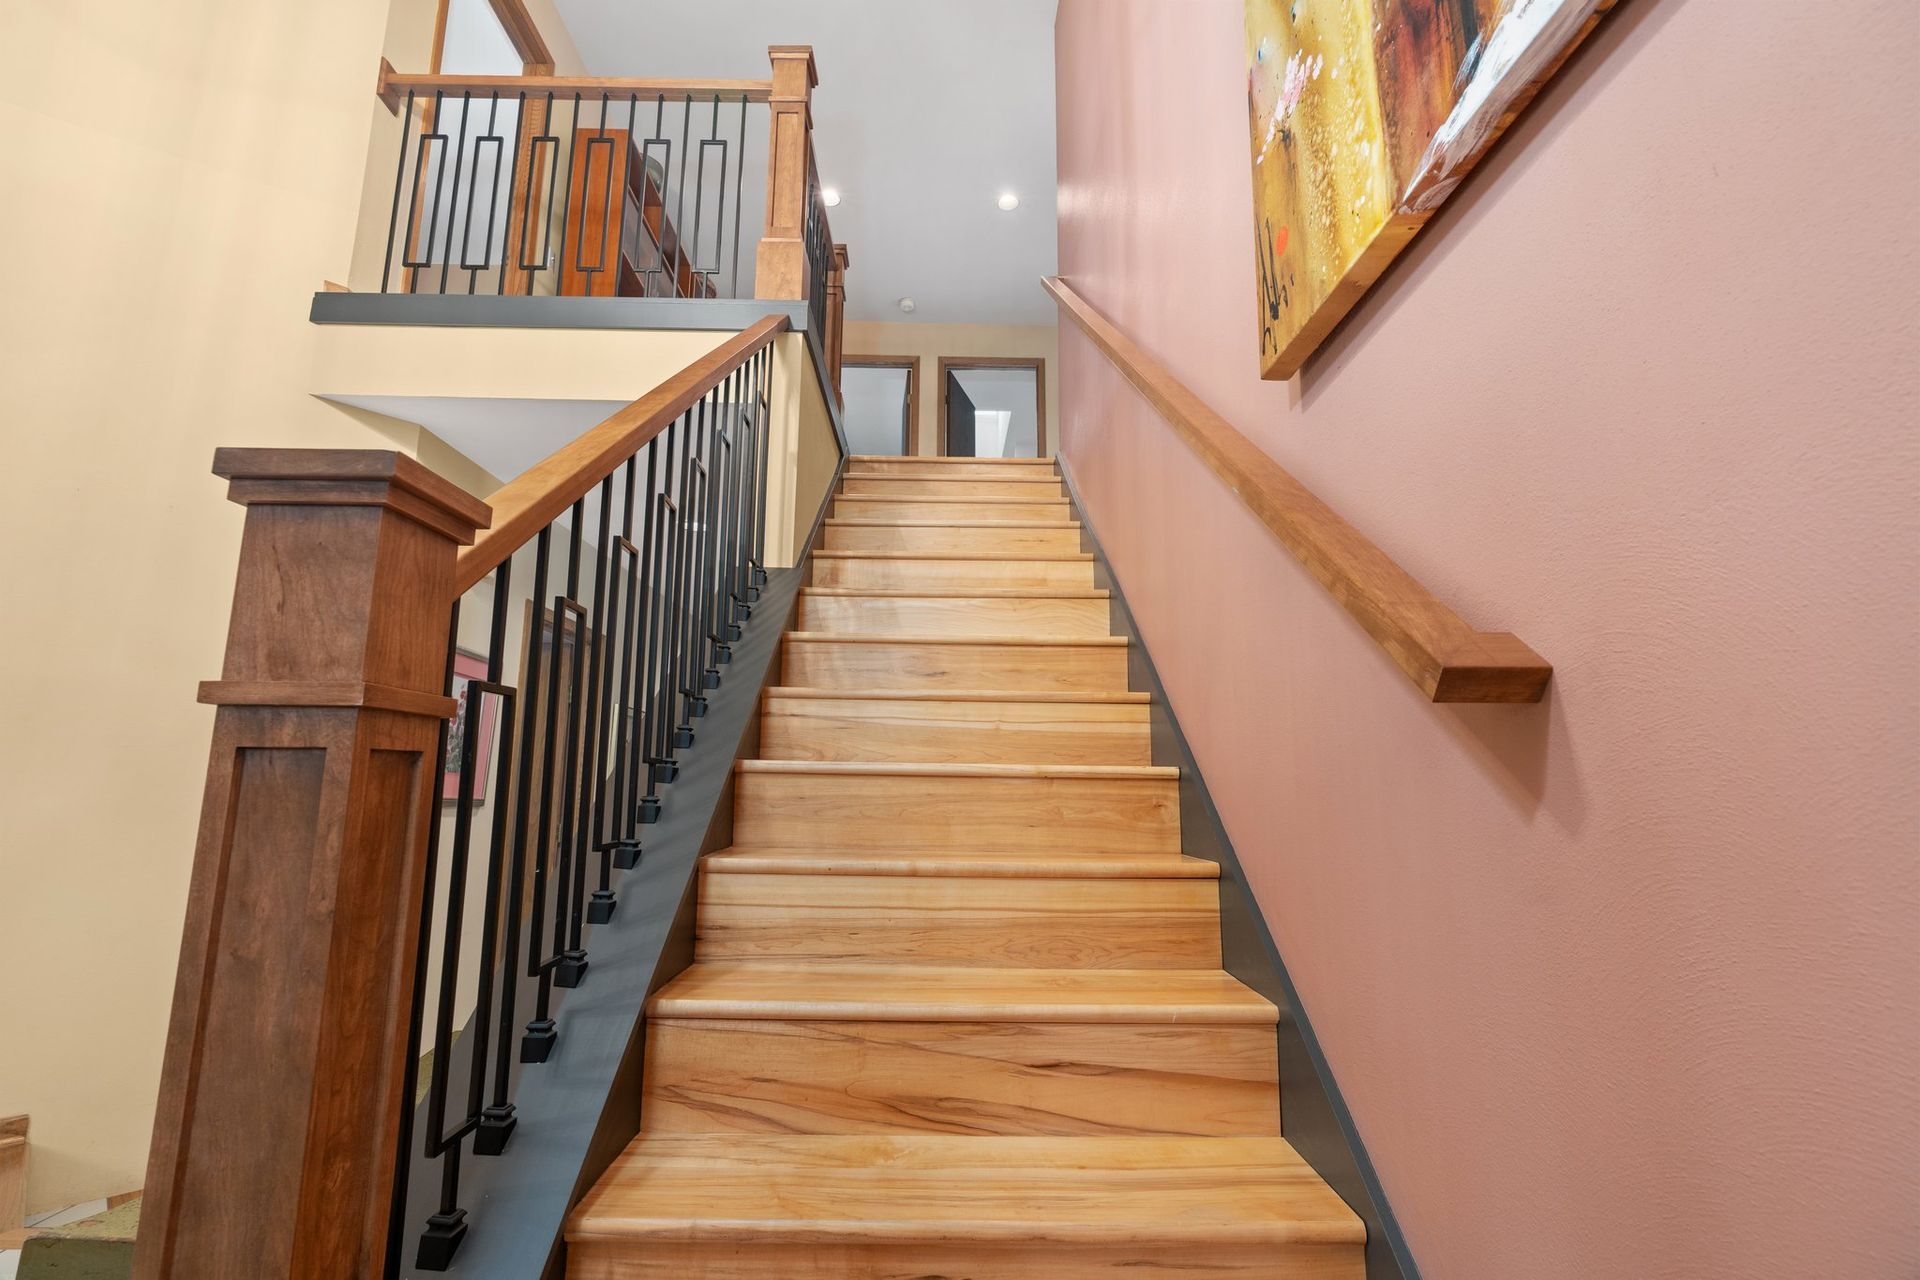 A wooden staircase with a metal railing and a painting on the wall.